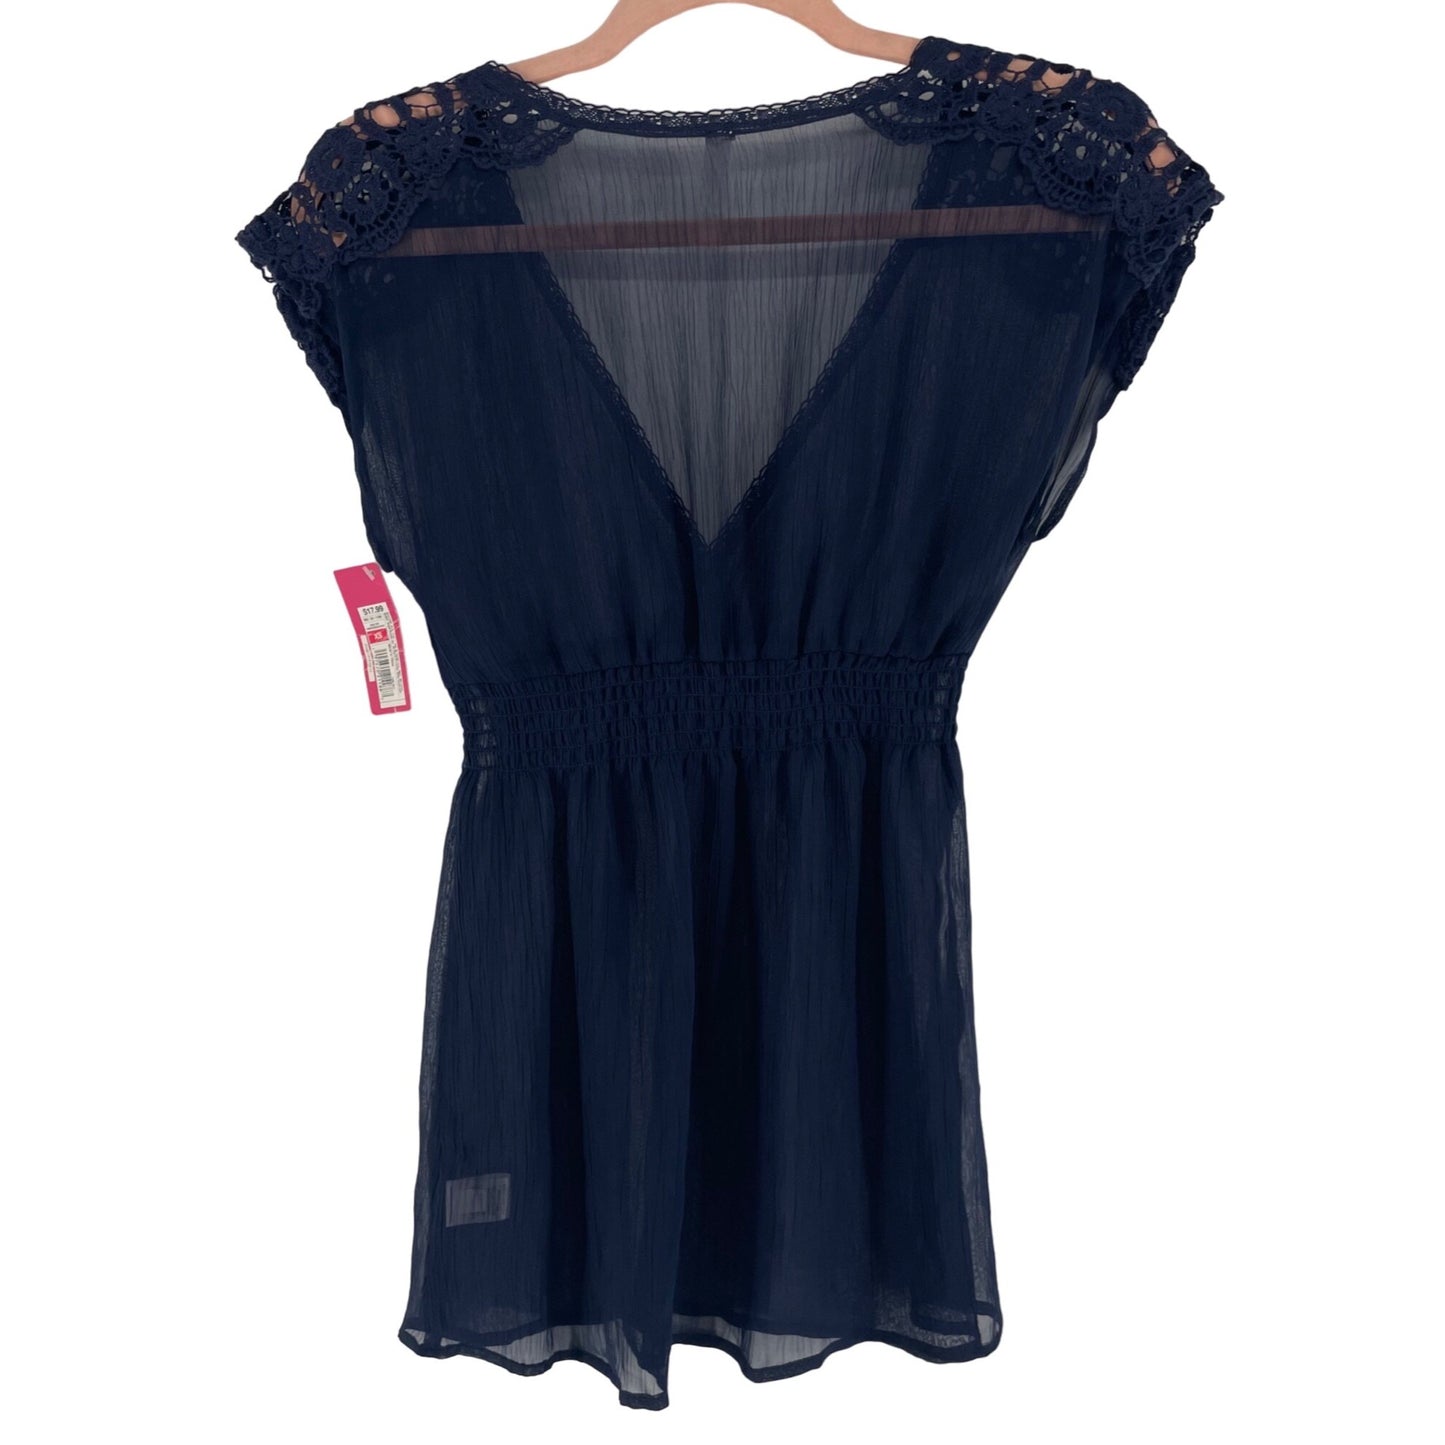 NWT Xhilaration Women's Size XS Navy Blue V-Neck Sheer Floral Lace Top